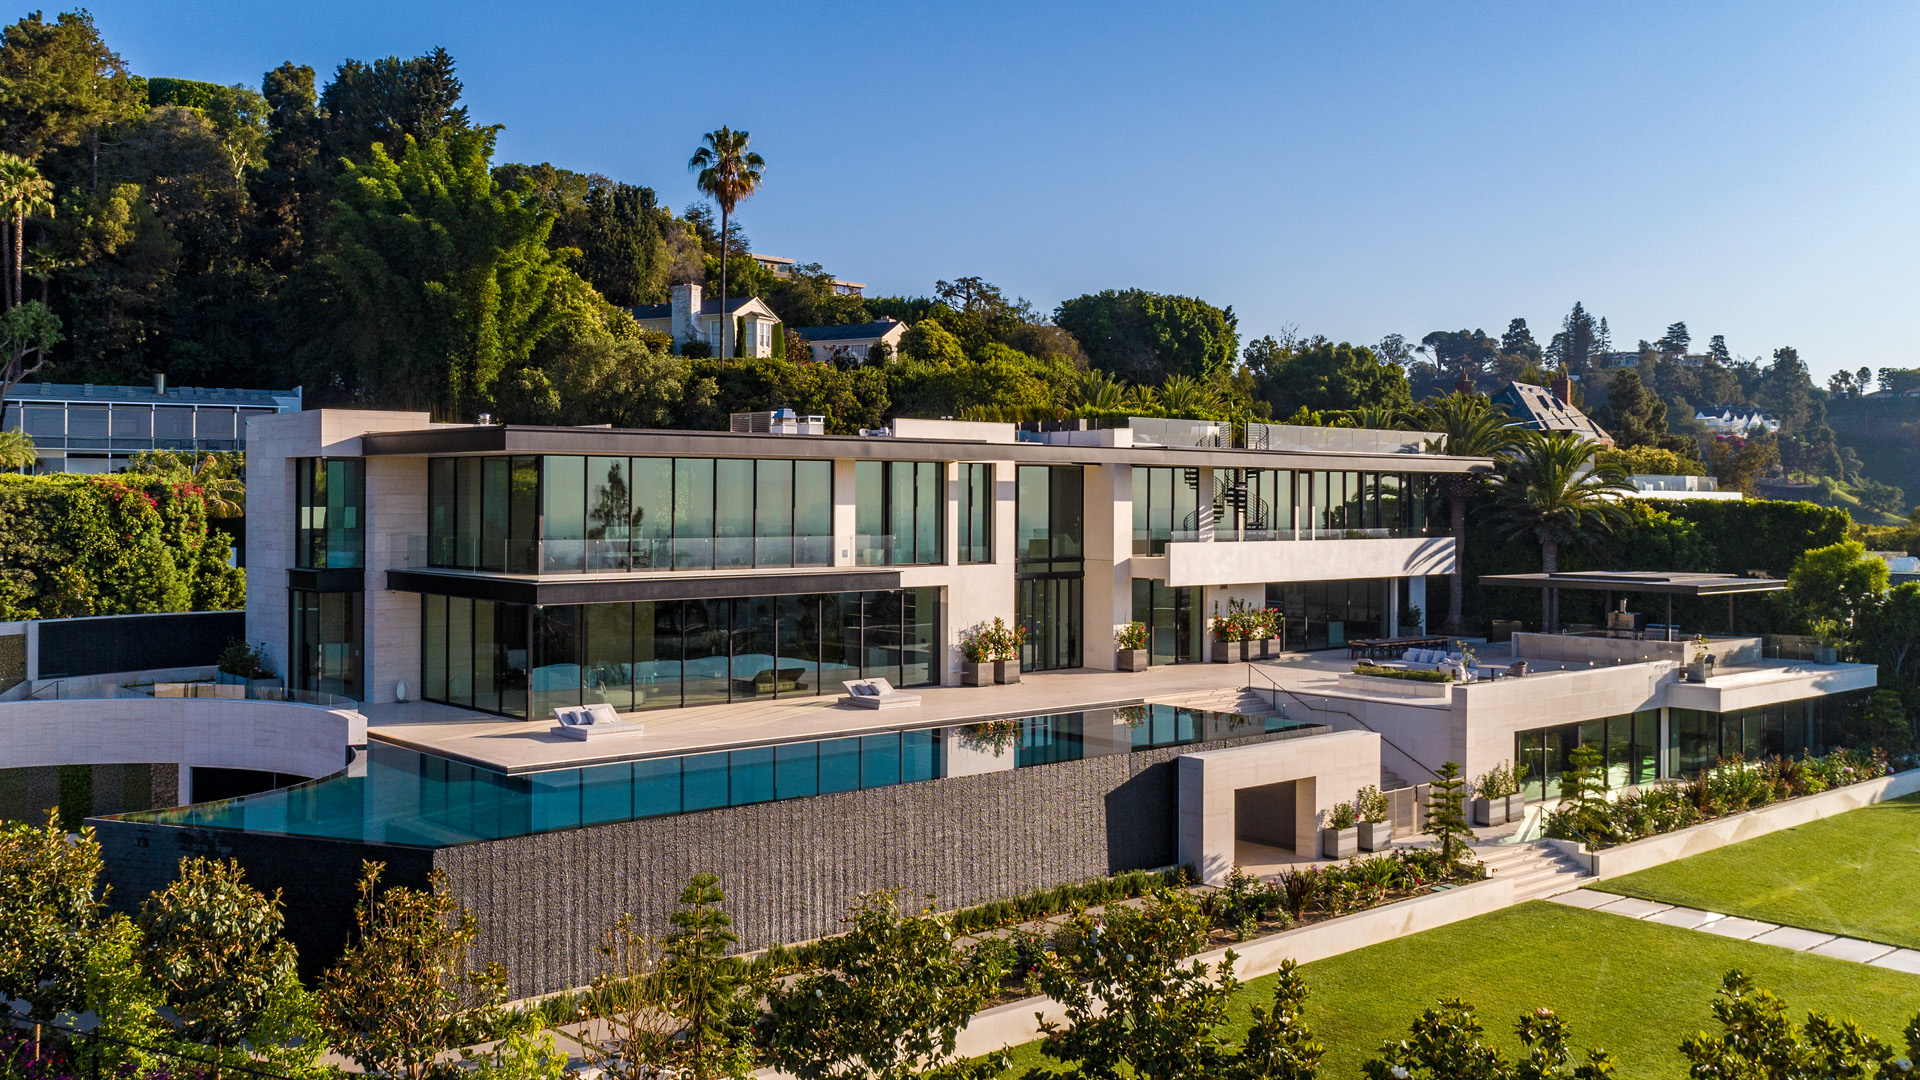 908 Bel Air | MGMT Partners